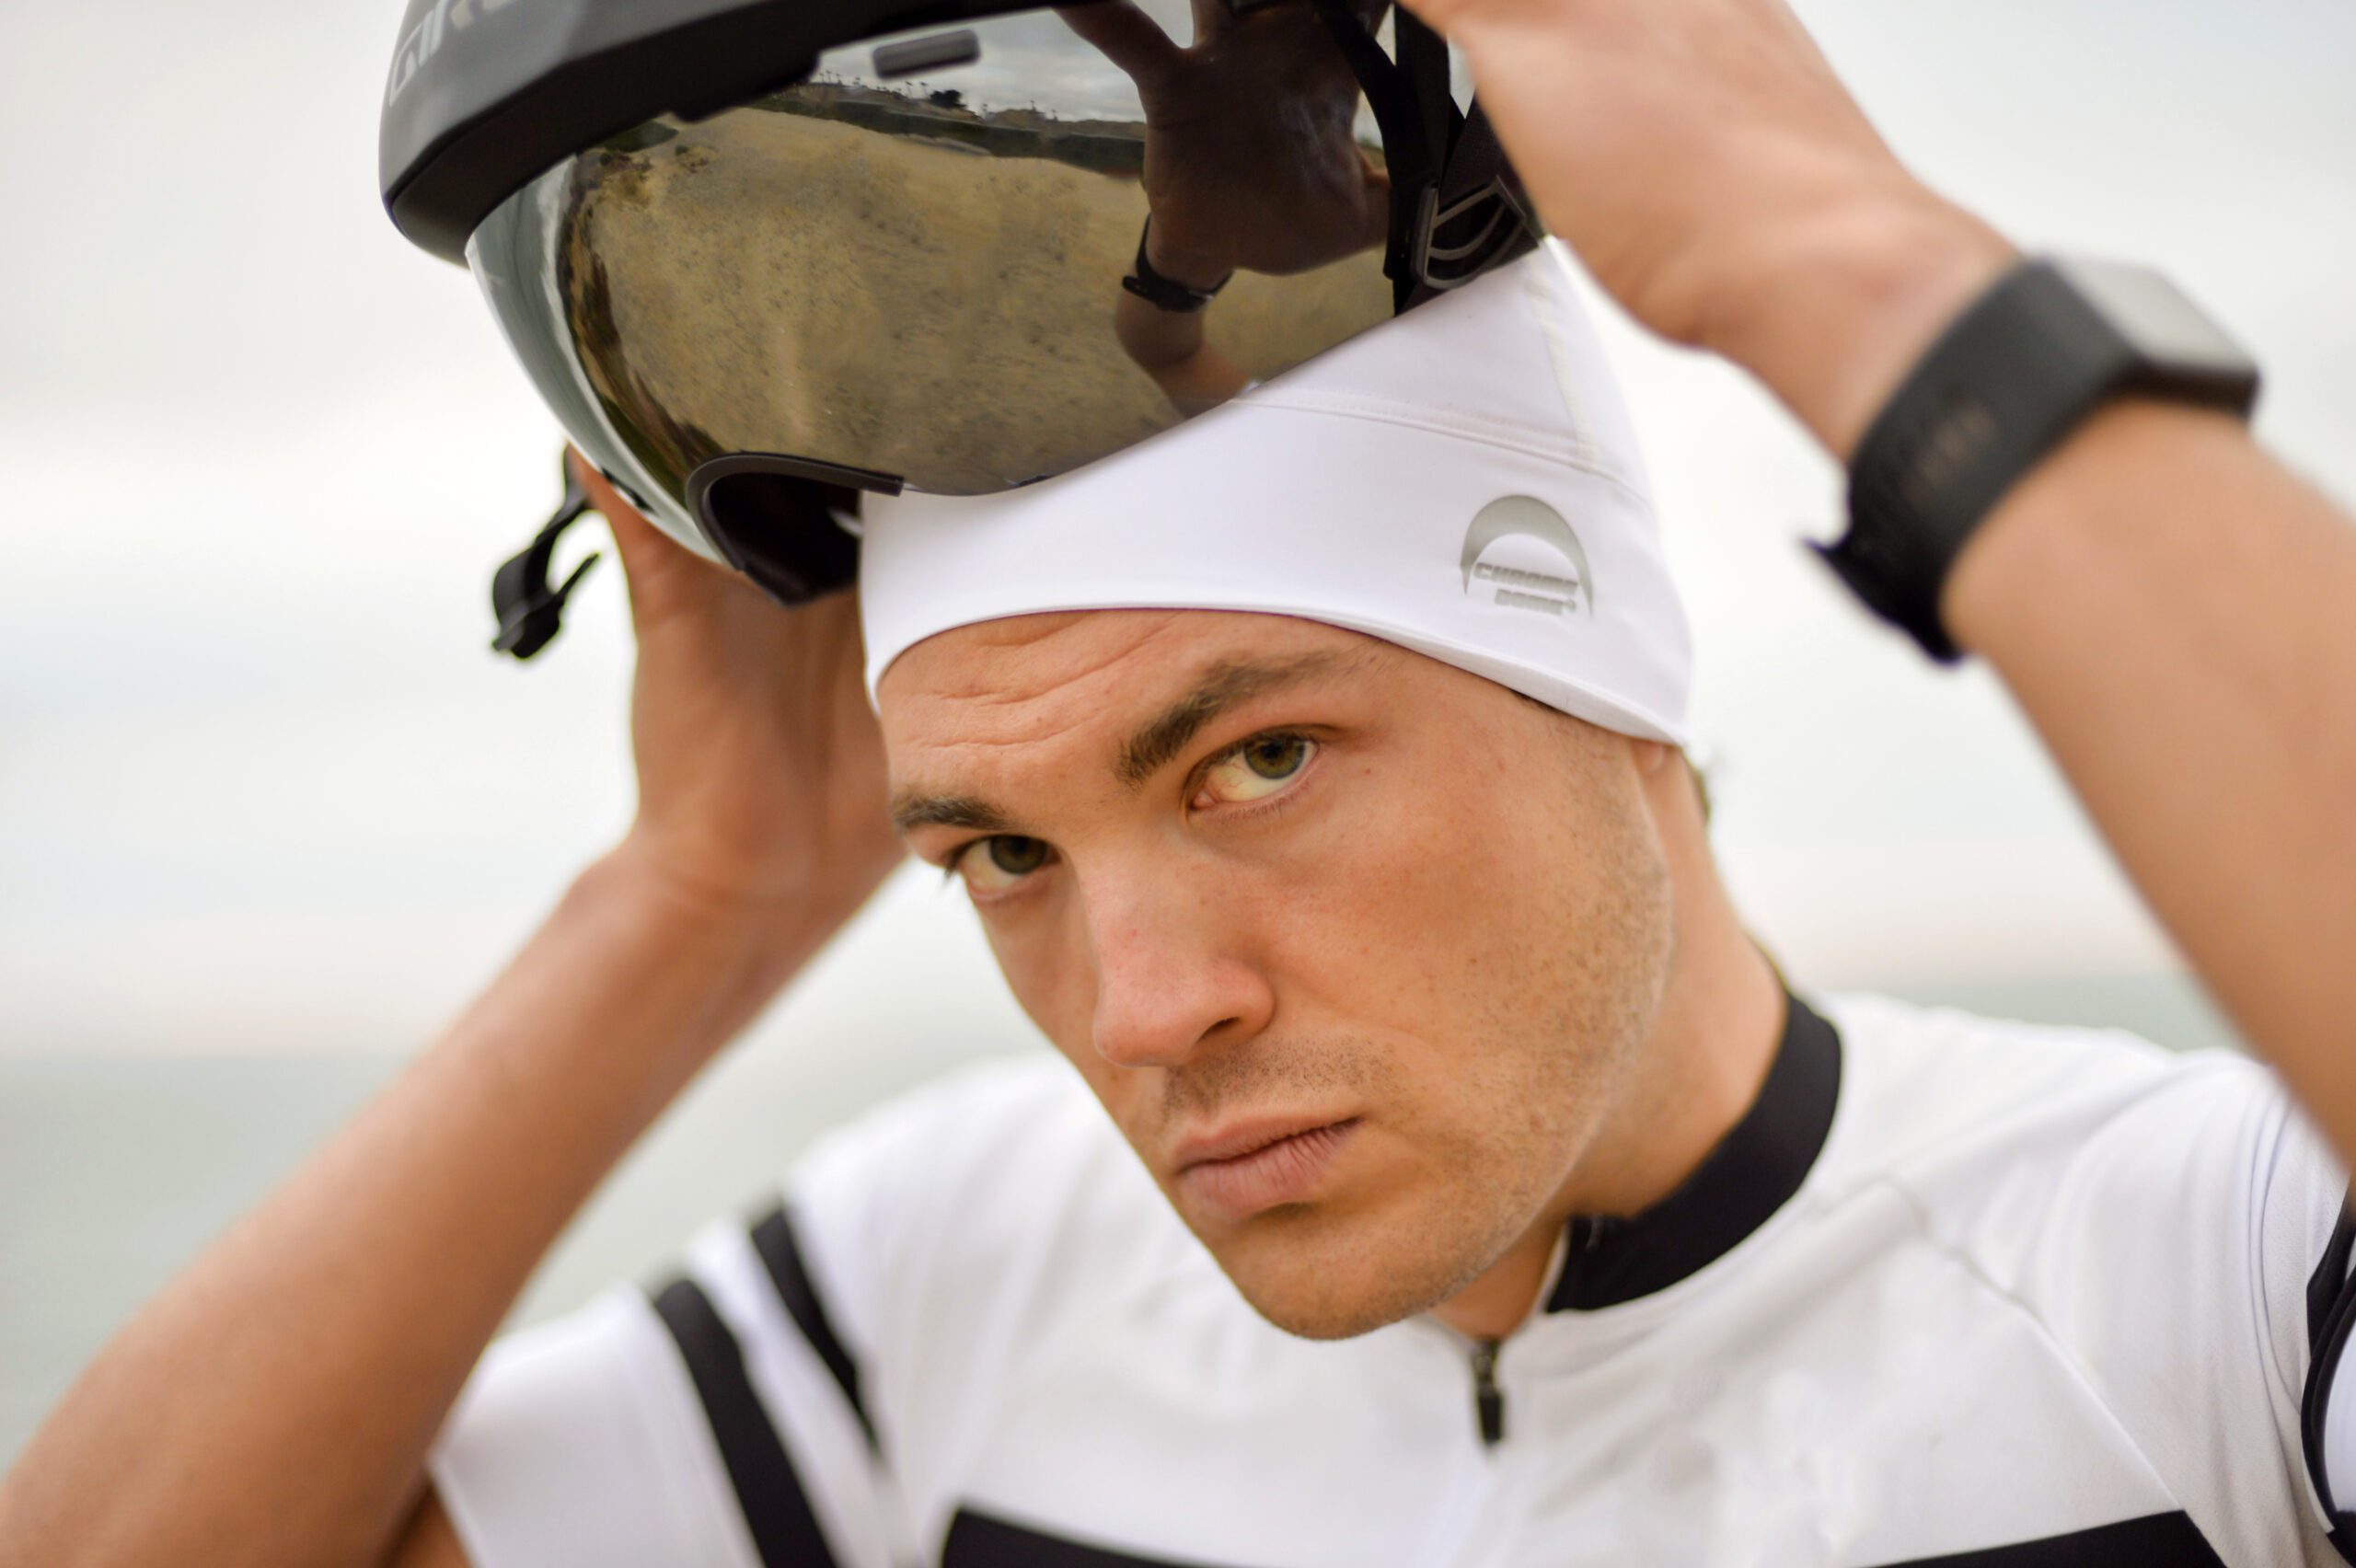 Cycling Hats that are great for helmet liners